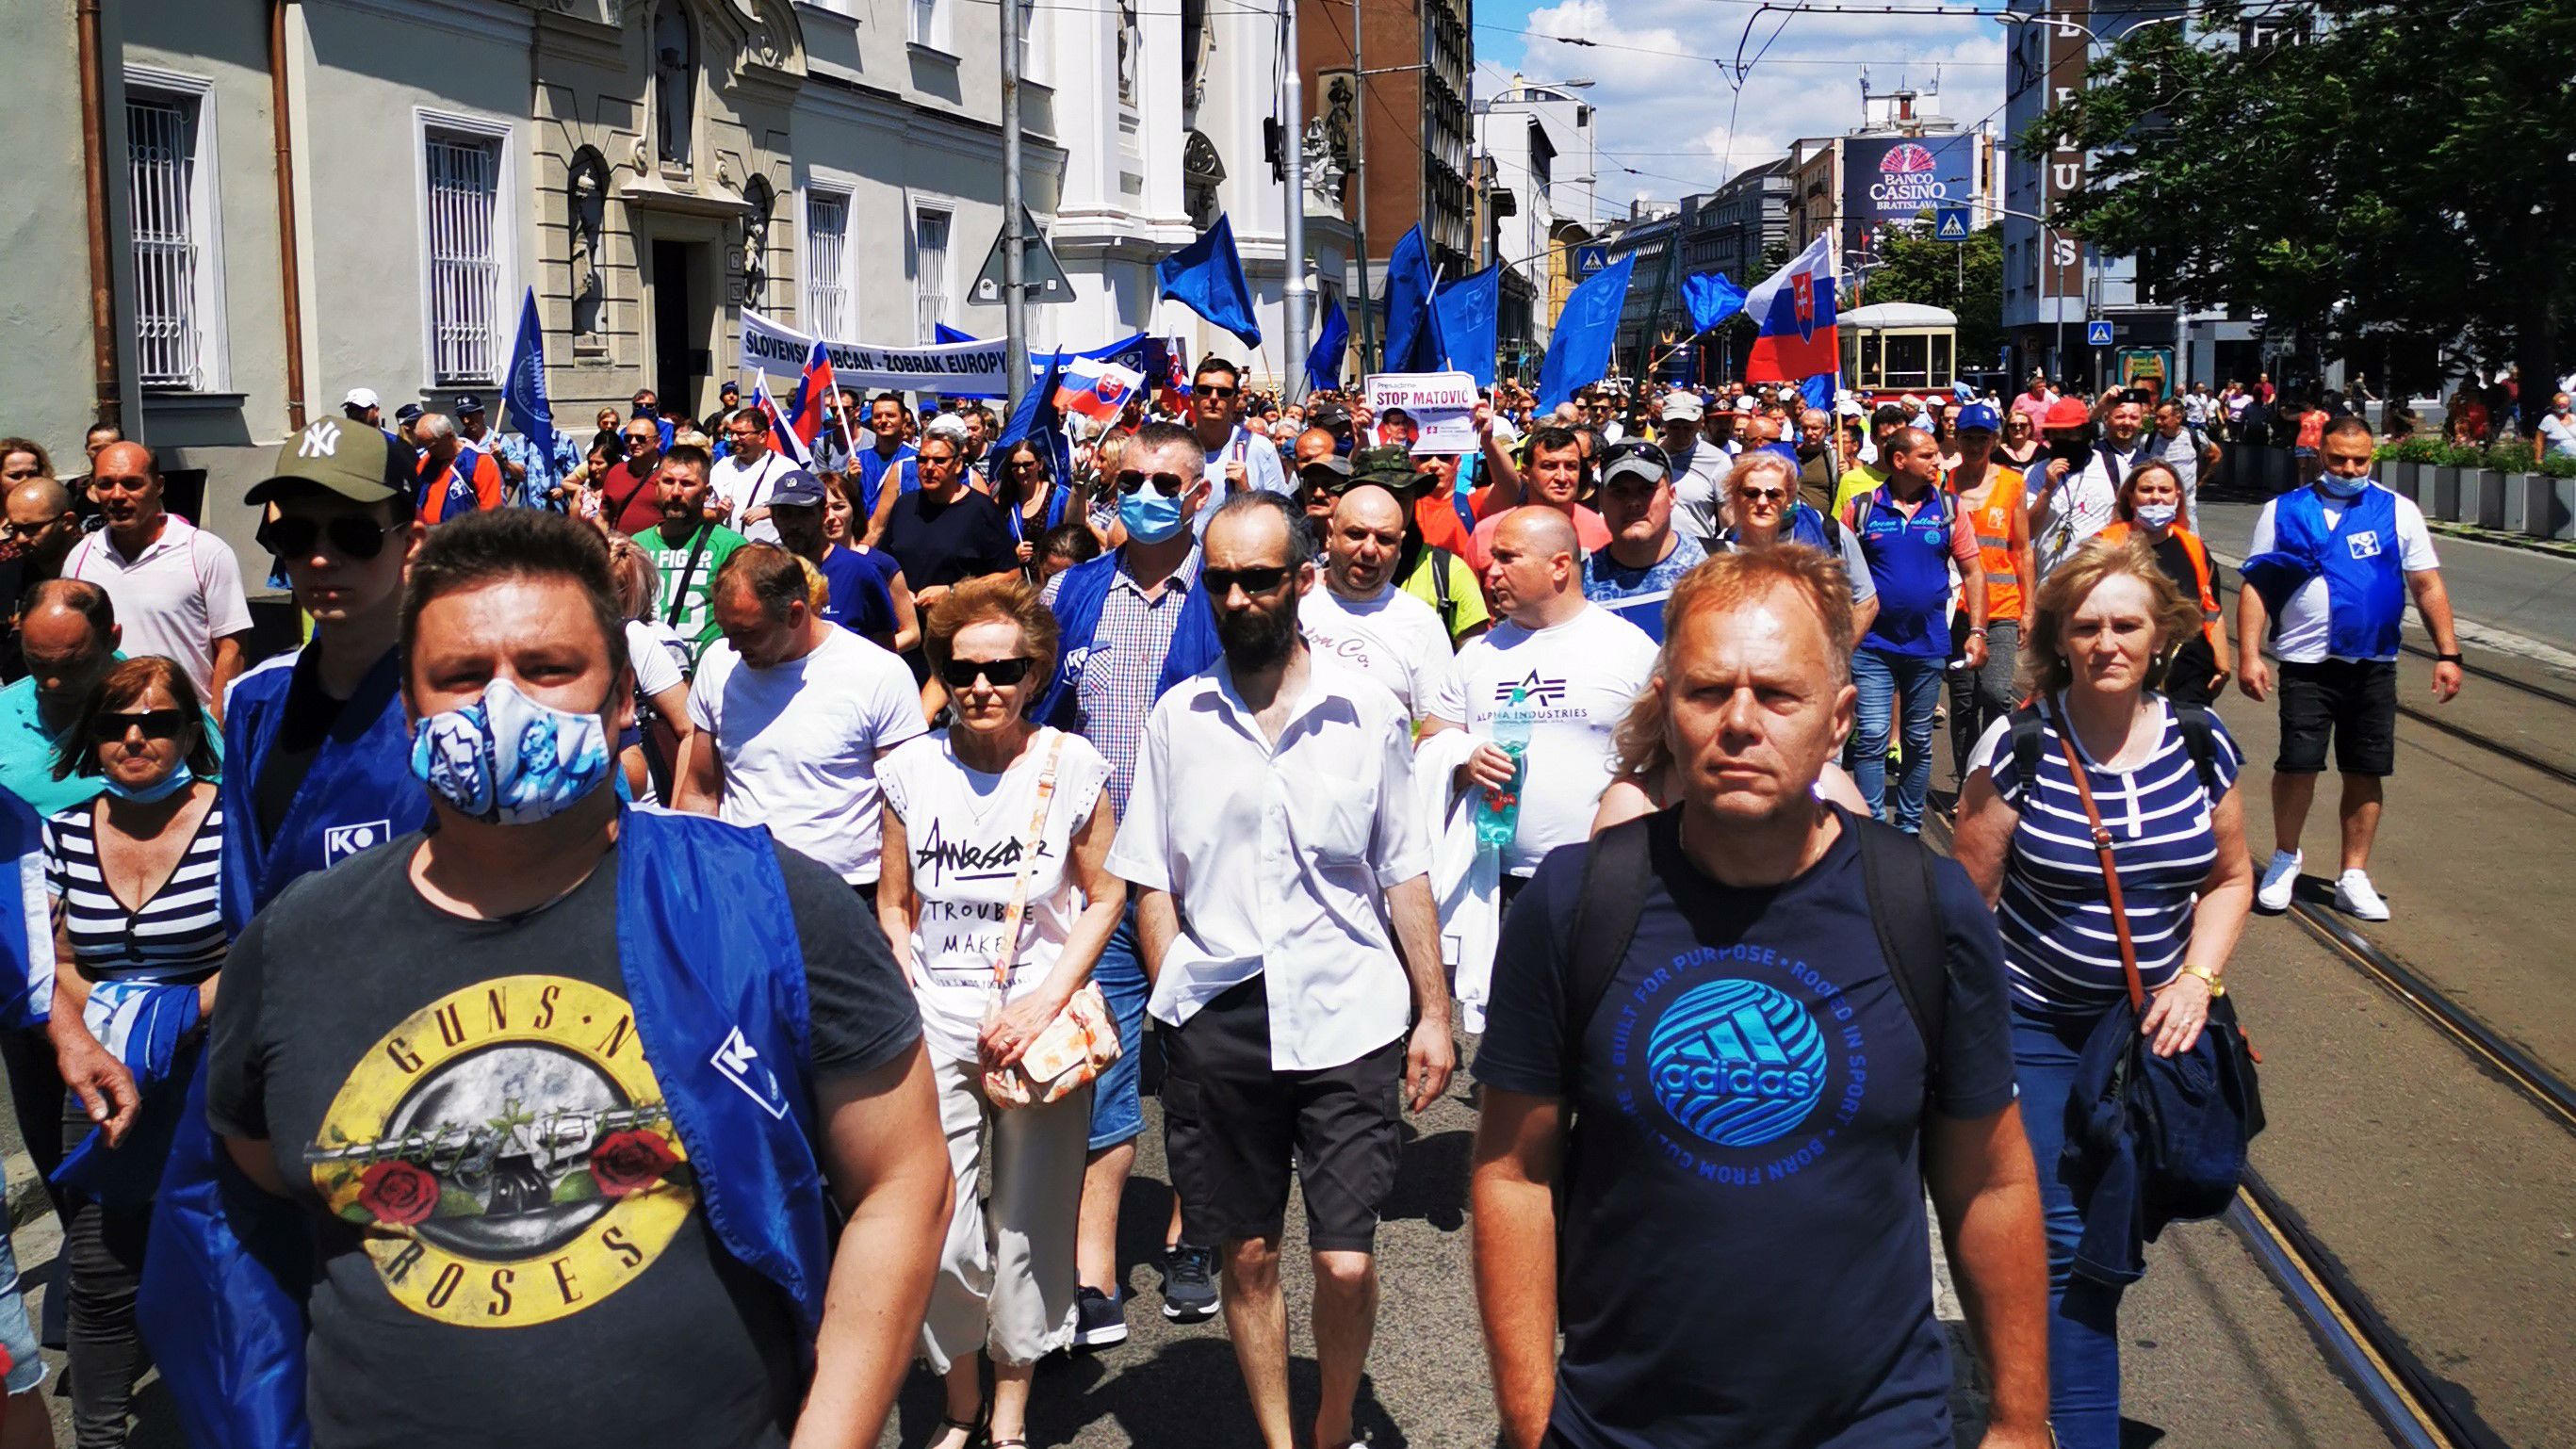 Slovakia: trade unions protest against attacks on the welfare state, social dialogue and trade union rights